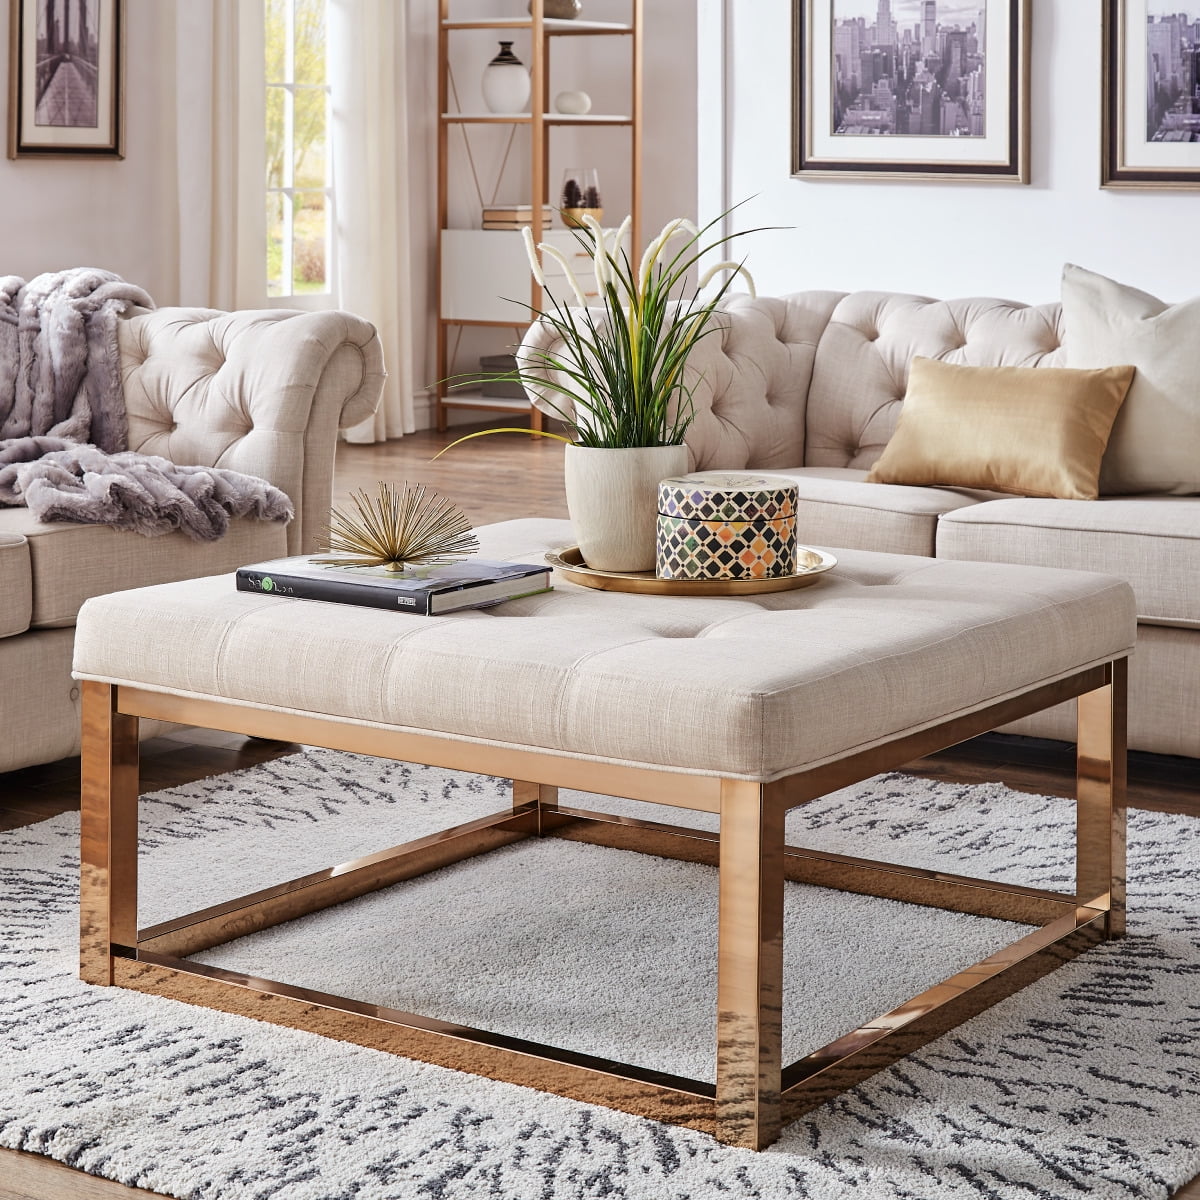 Unique Cushioned Coffee Table for Small Space